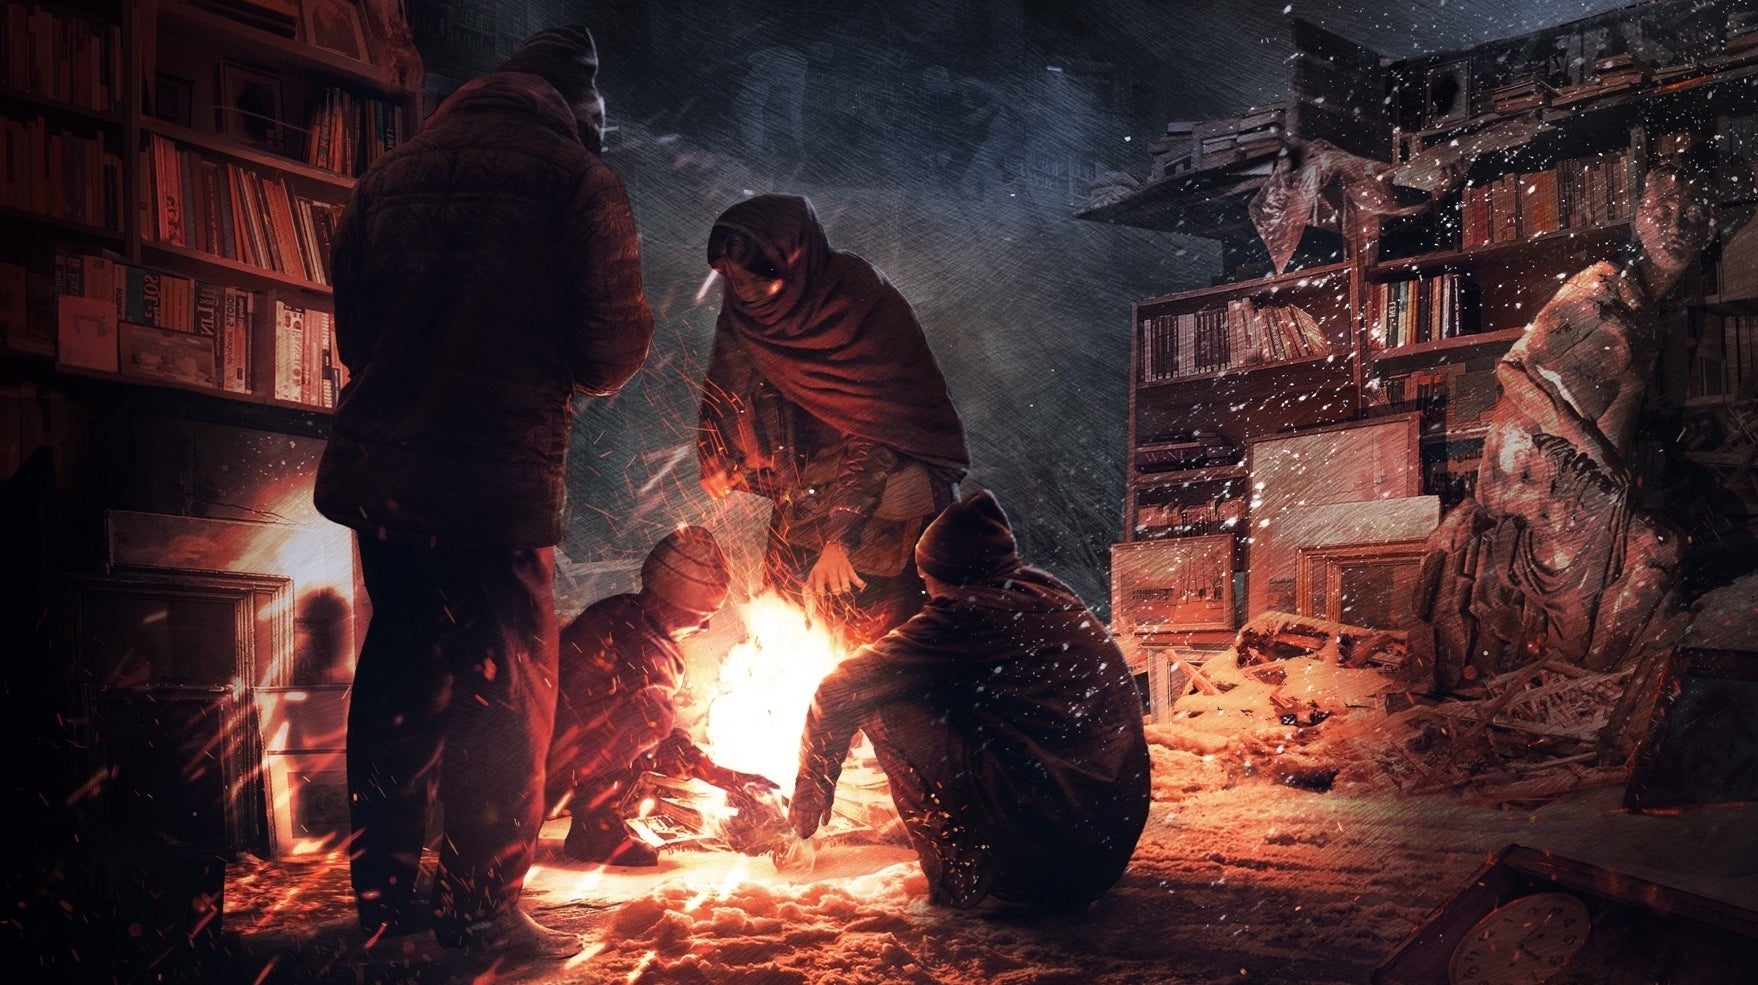 Image for Bleak survival game This War of Mine's final Stories DLC, Fading Embers, out next month